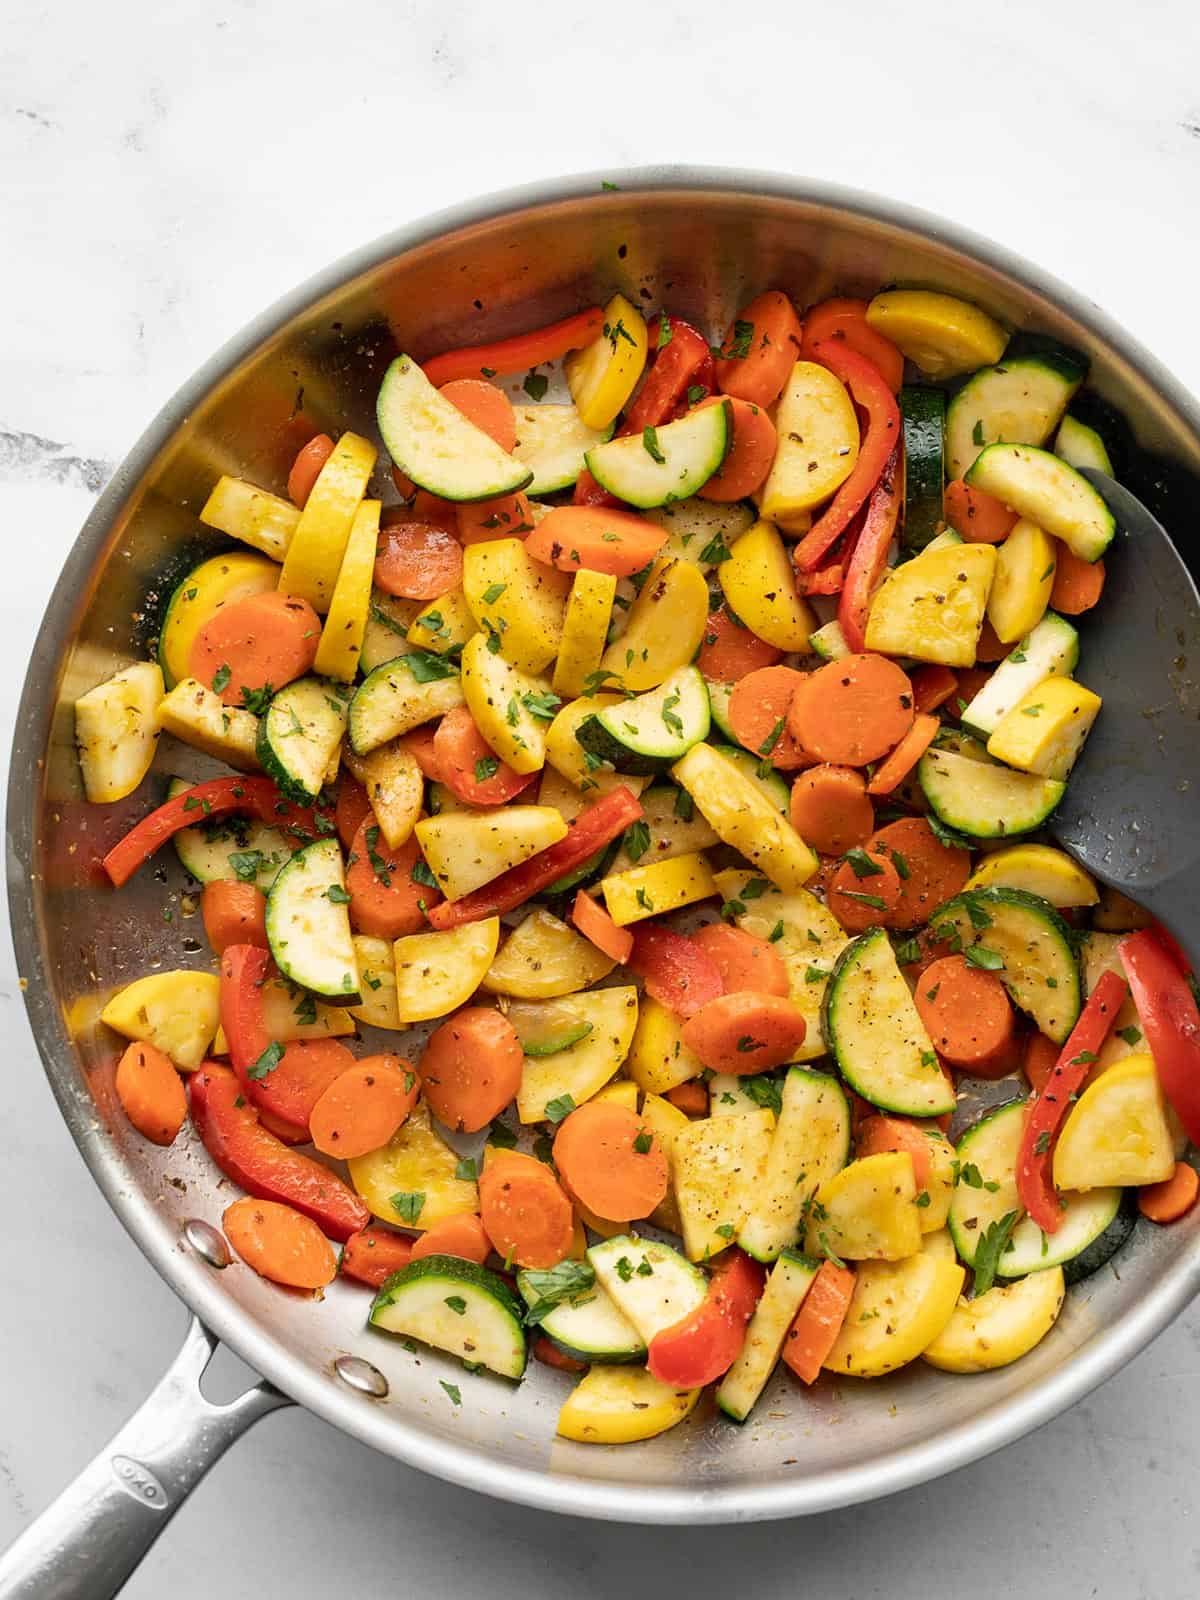 Sautéed vegetables in a skillet with a spatula